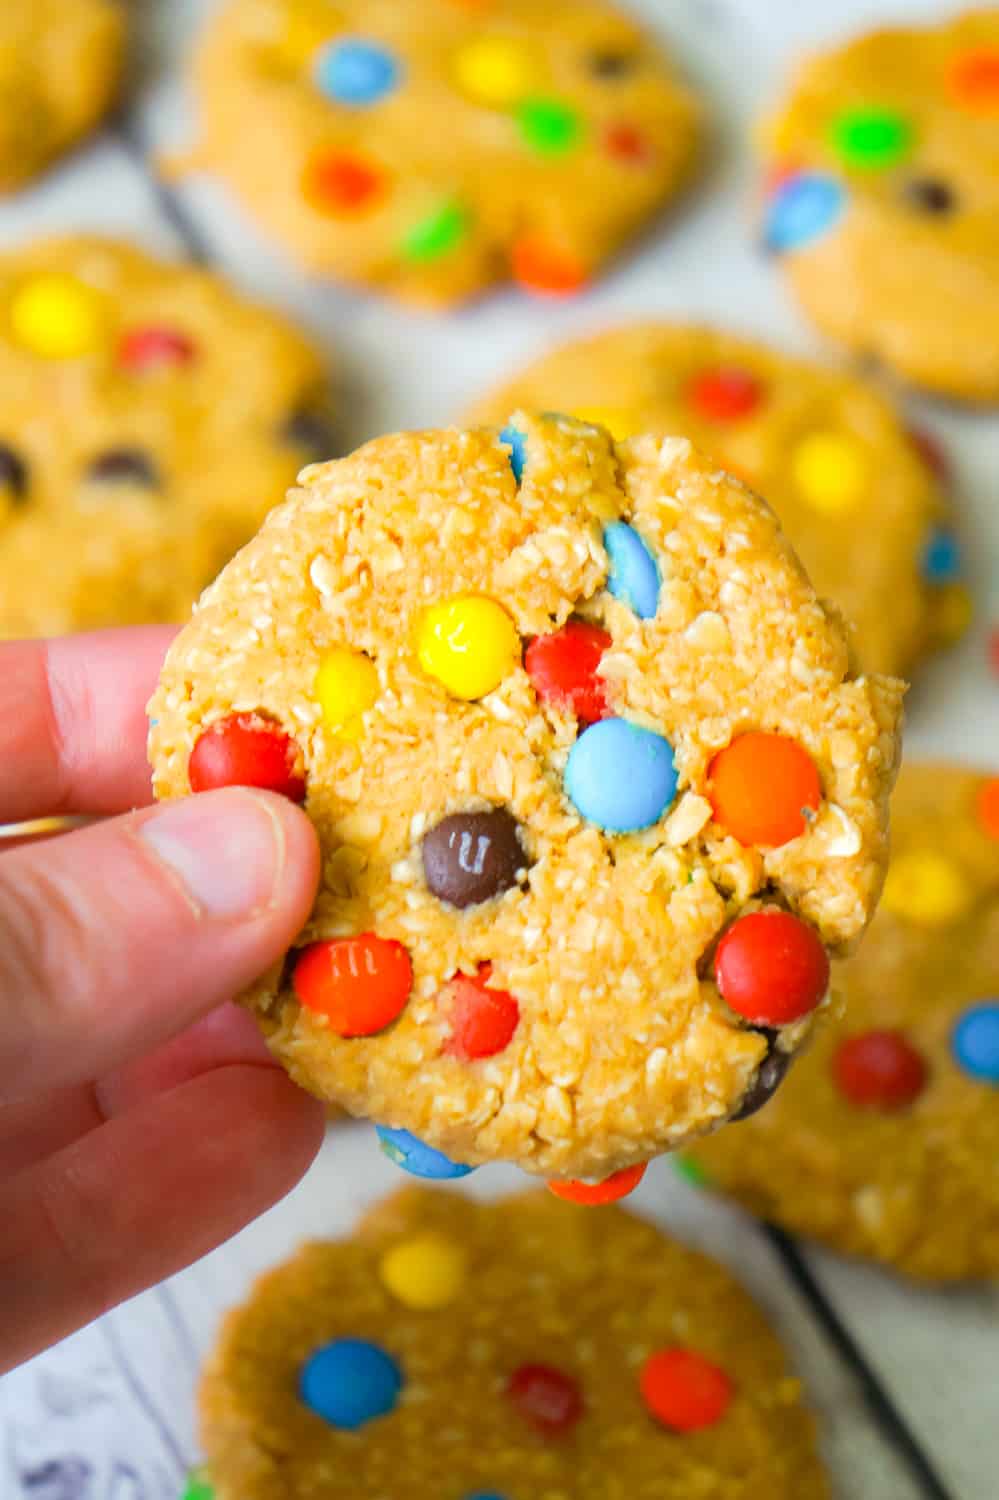 No Bake Monster Cookies are an easy peanut butter dessert recipe perfect for when you don't feel like turning on the oven. These no bake oatmeal peanut cookies are loaded with mini M&M's.